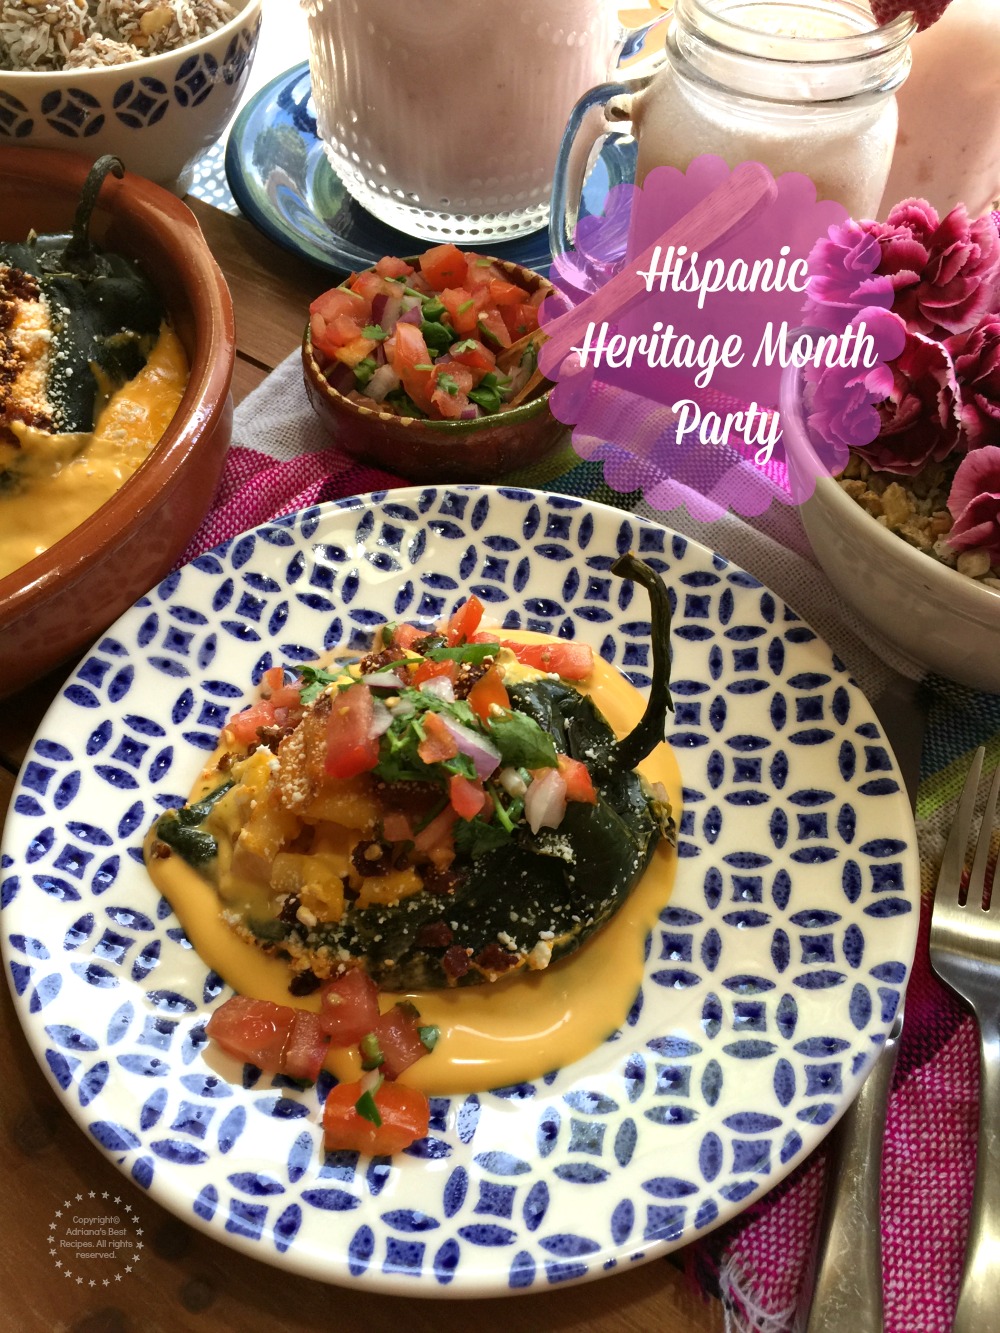 Hispanic Heritage Month Party Menu with NESTLE